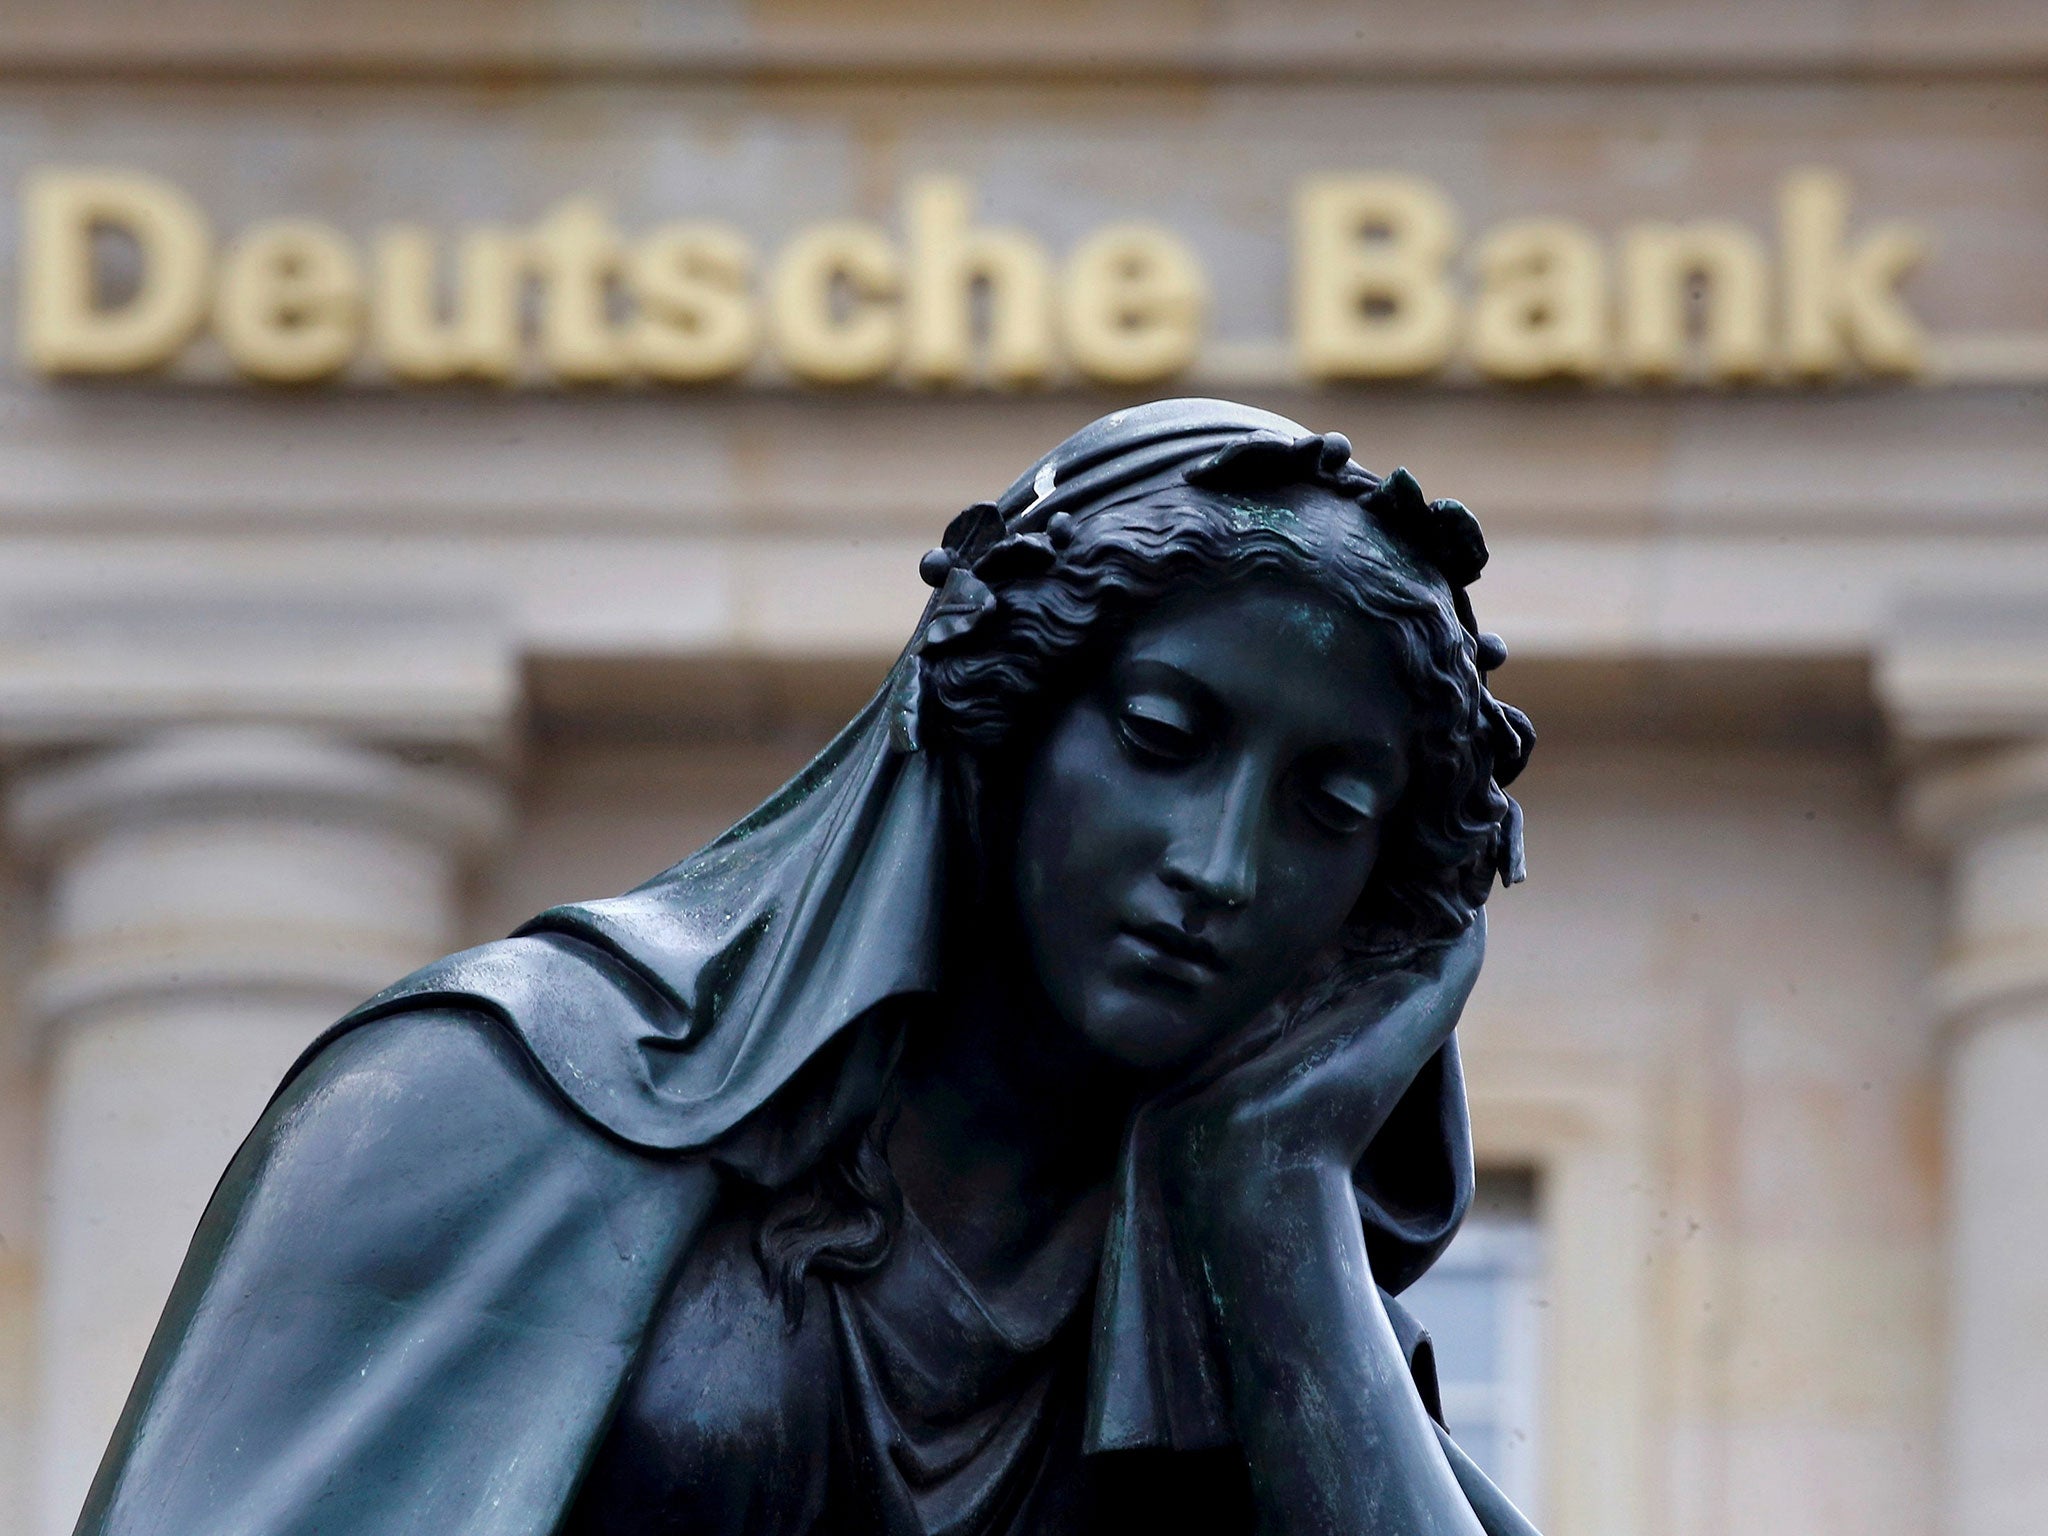 Deutsche Bank says the deal's terms are yet to be finalised